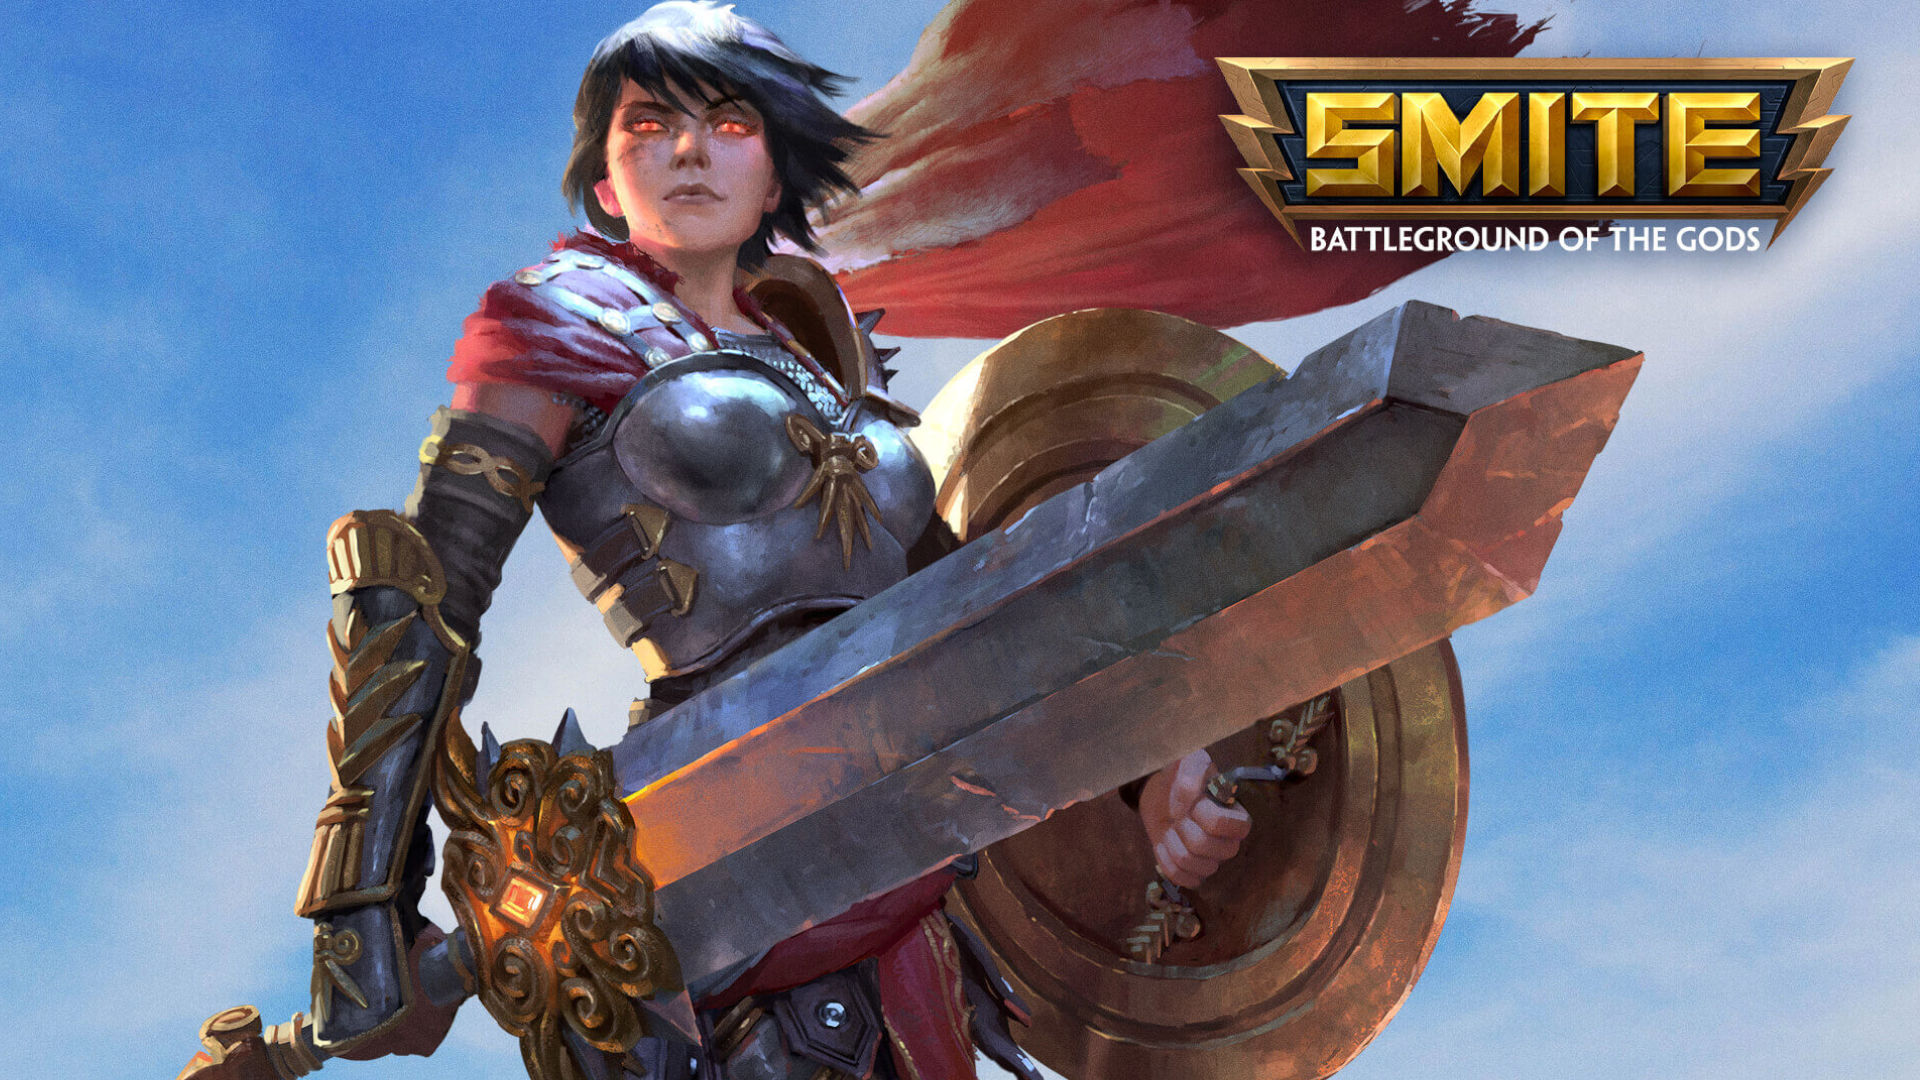 Smite key art of a warrior with her massive sword, shield, and red cape, looking into the distance